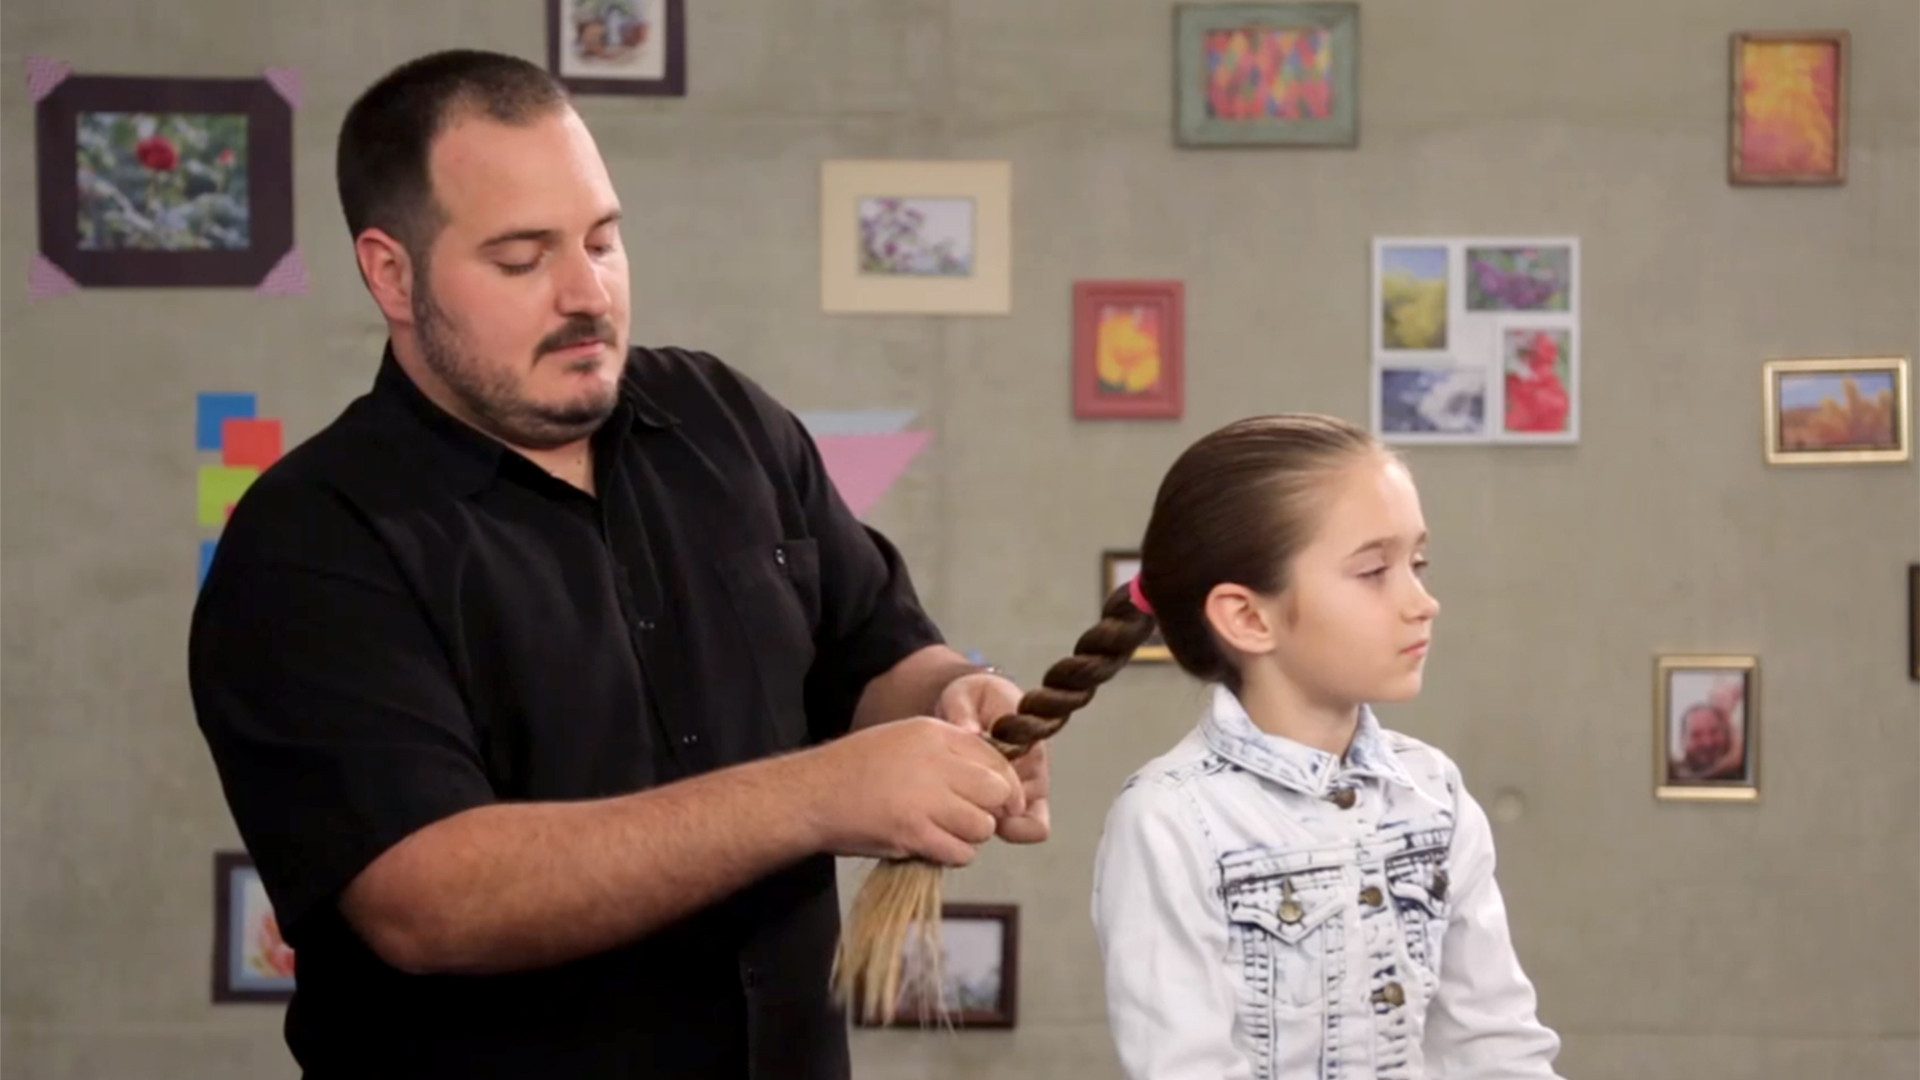 Easy Hairstyles For Dads To Do
 Single dad teaches art of braids ponytails in adorable